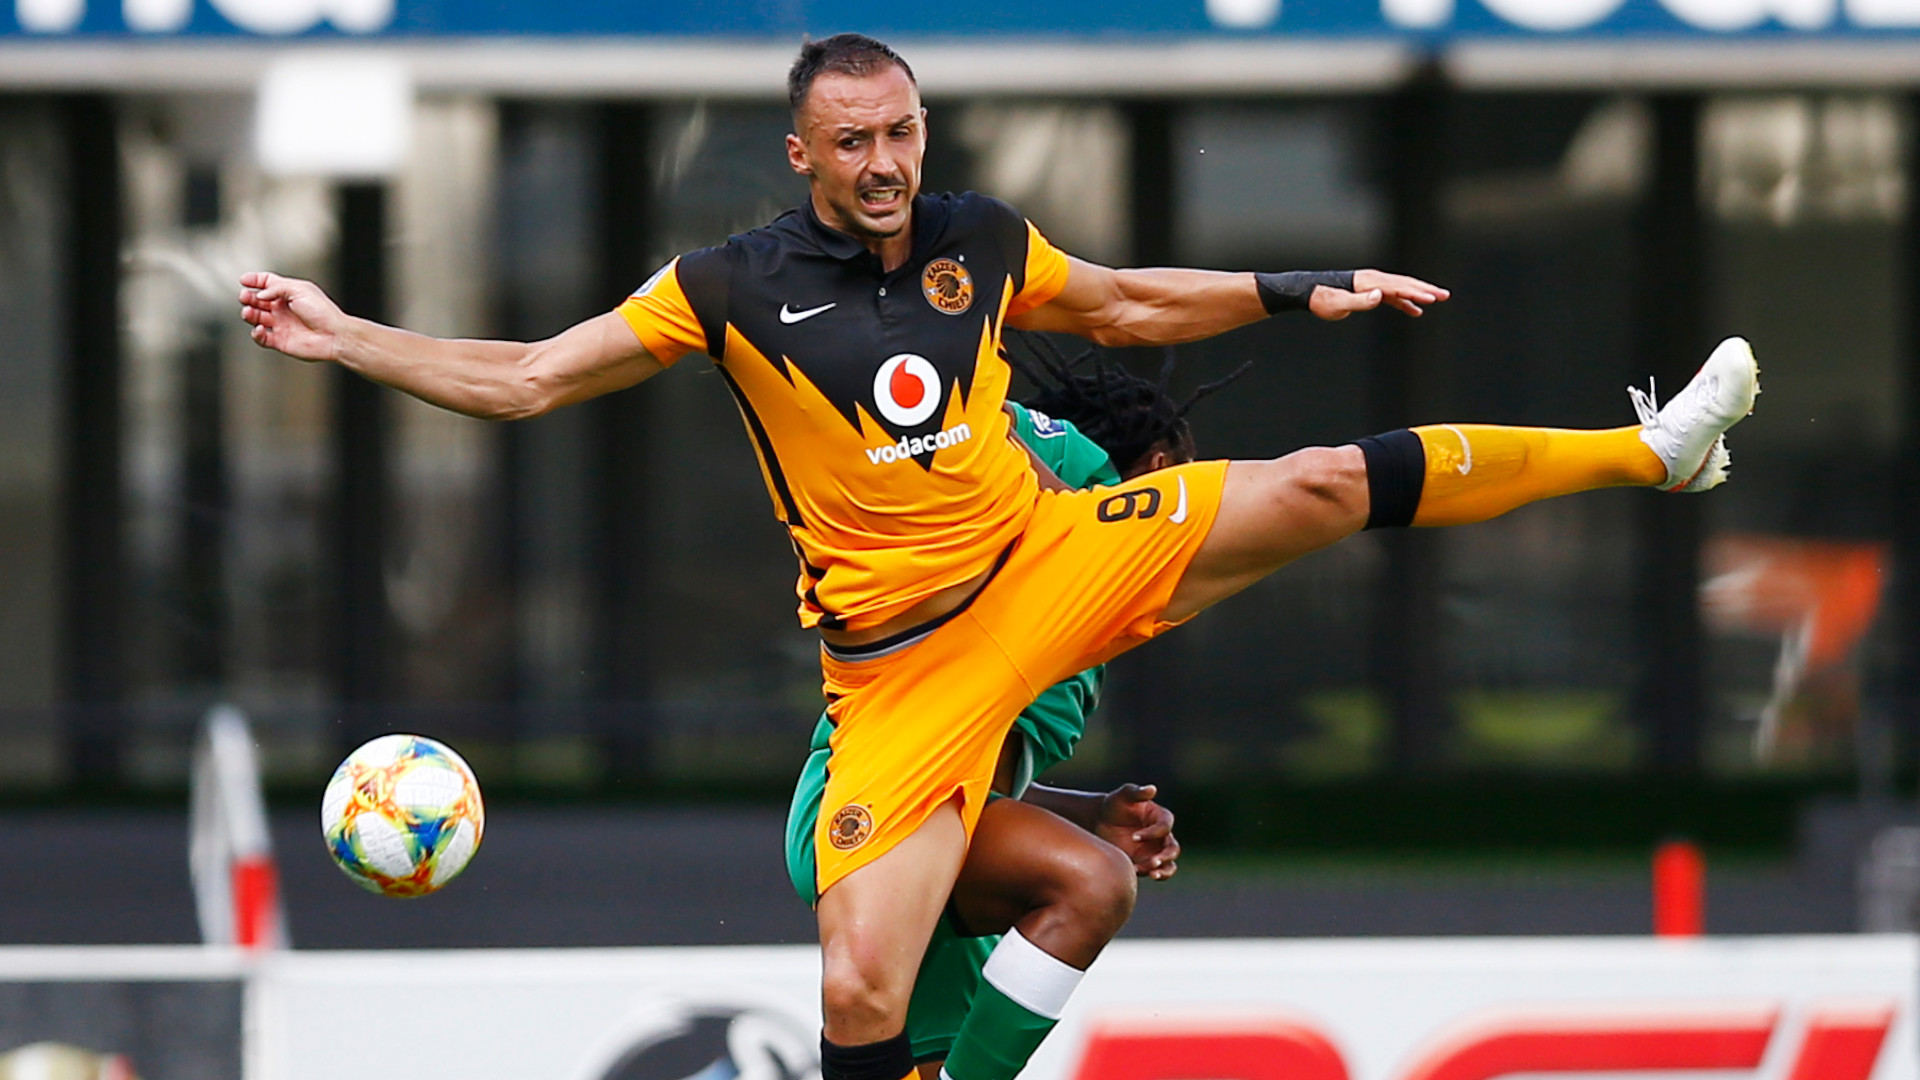 Hunt: Nurkovic is what Kaizer Chiefs' future needs